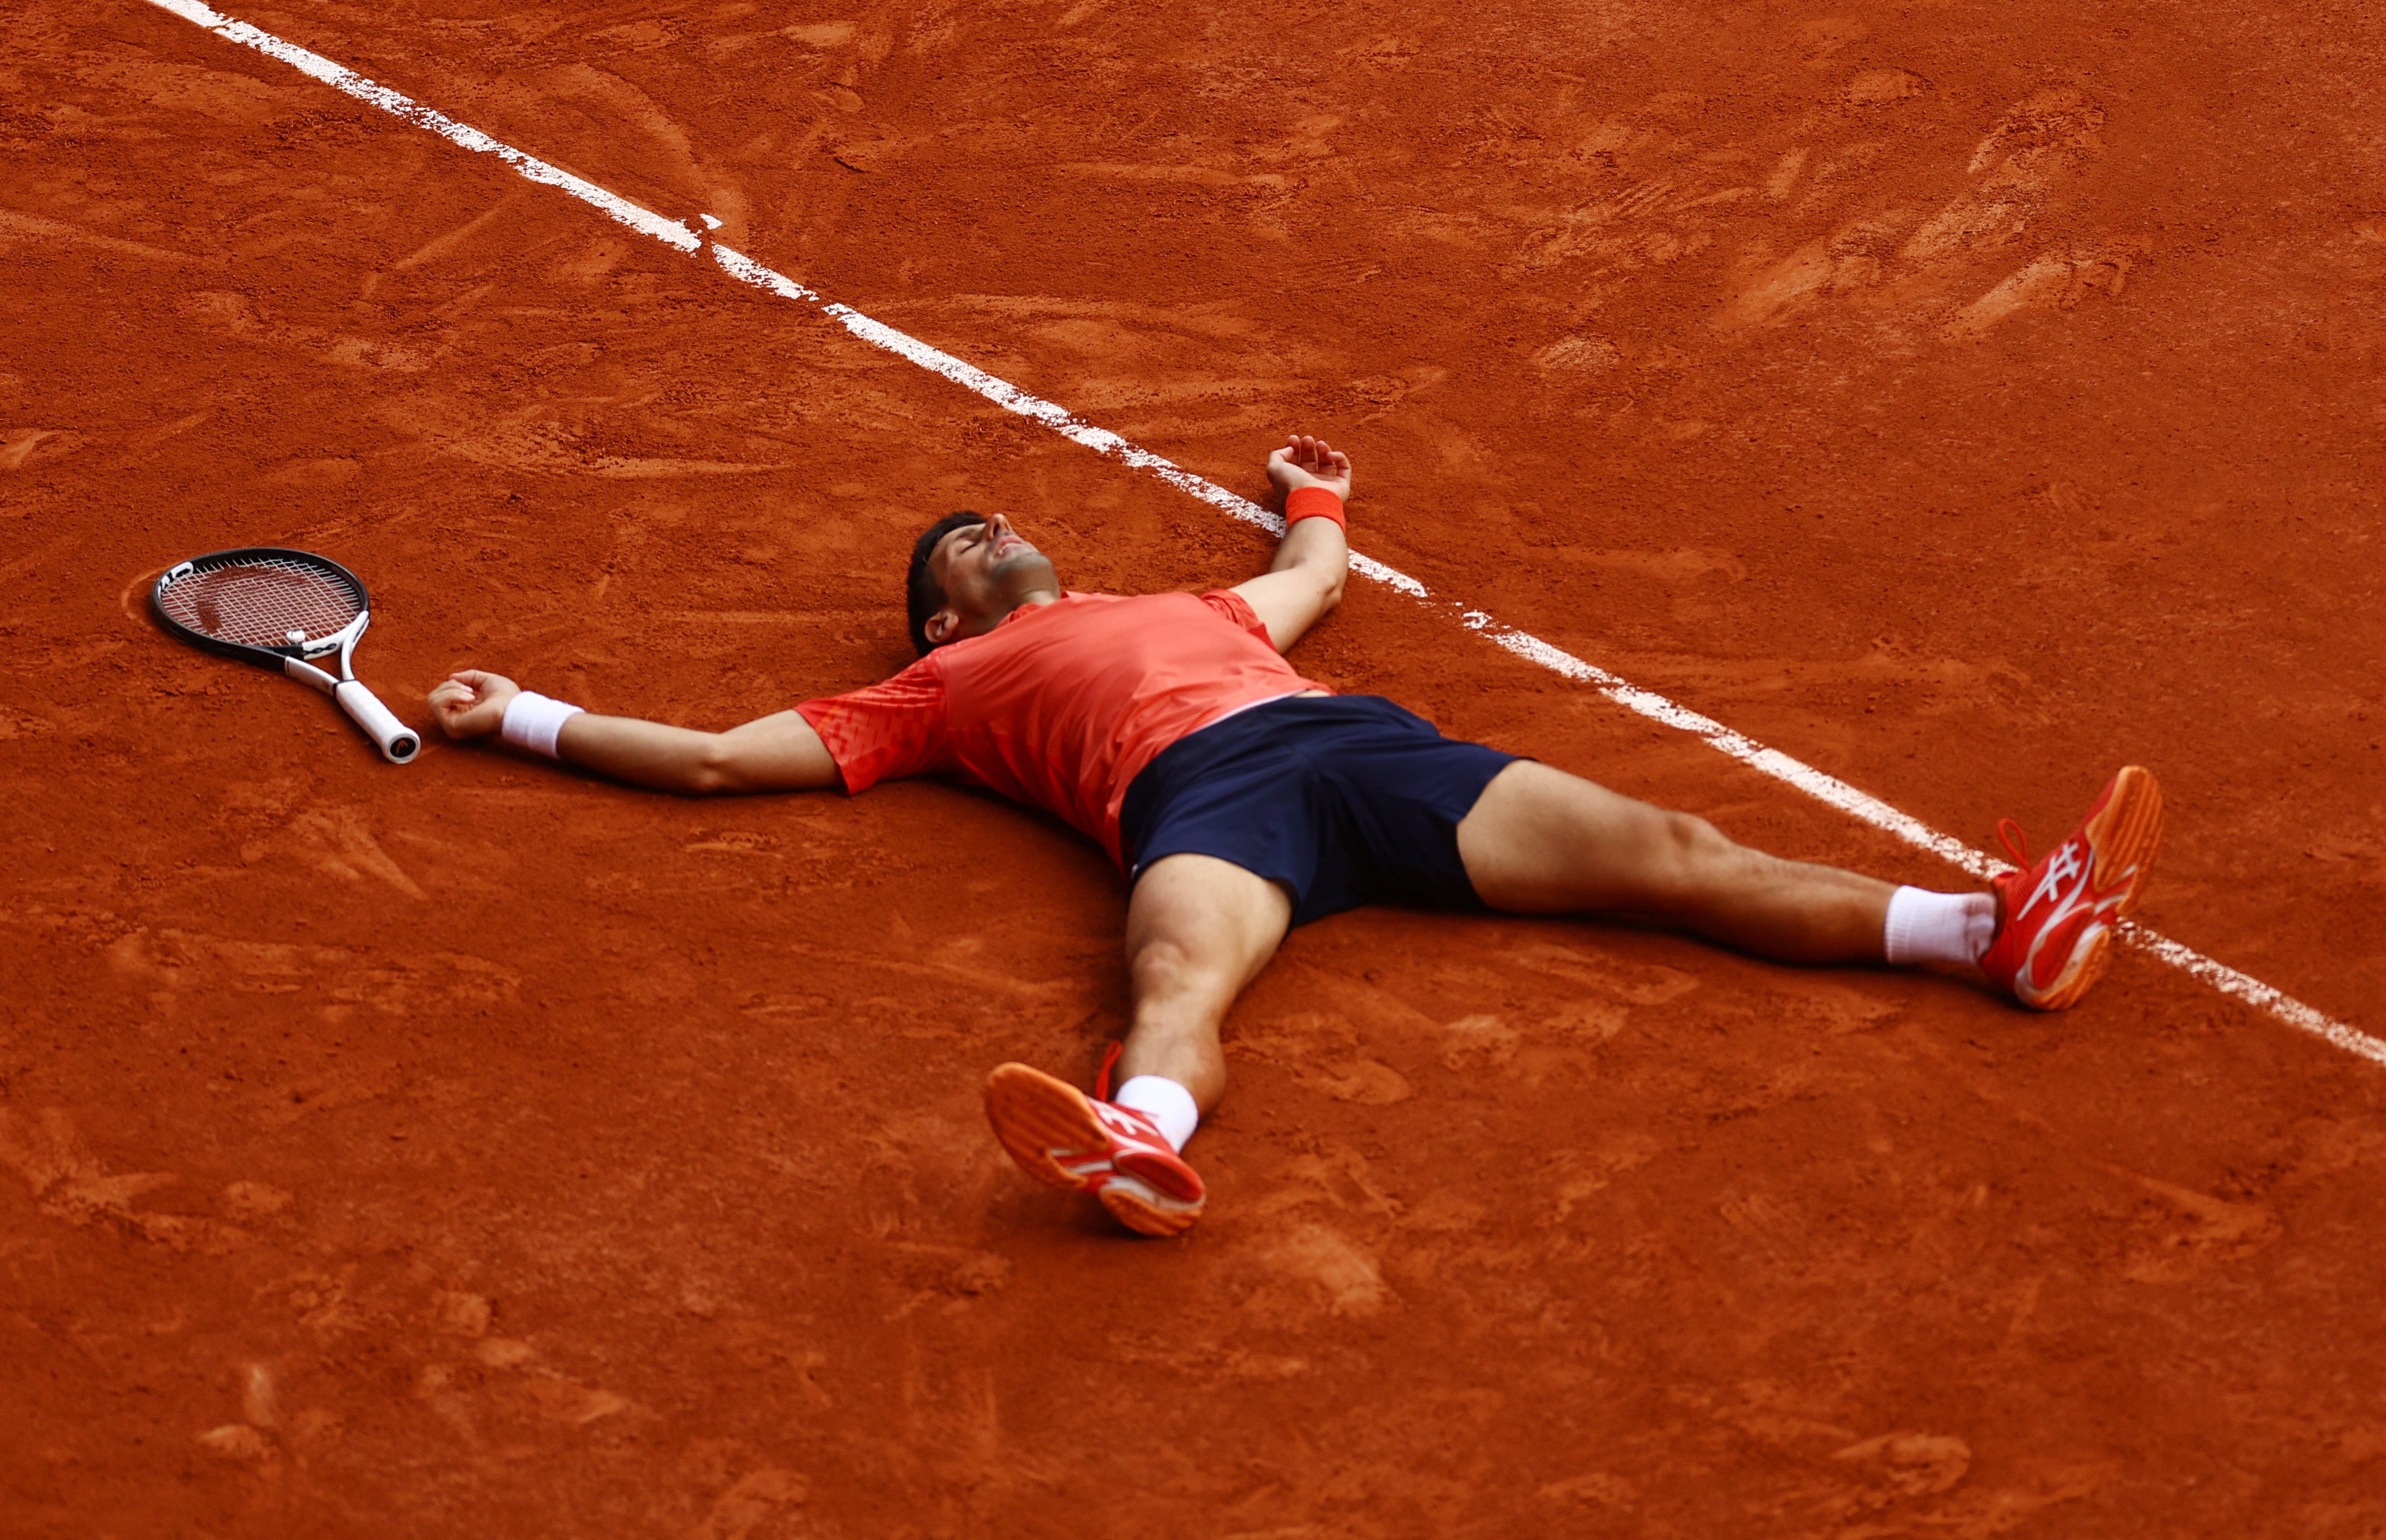 french open live